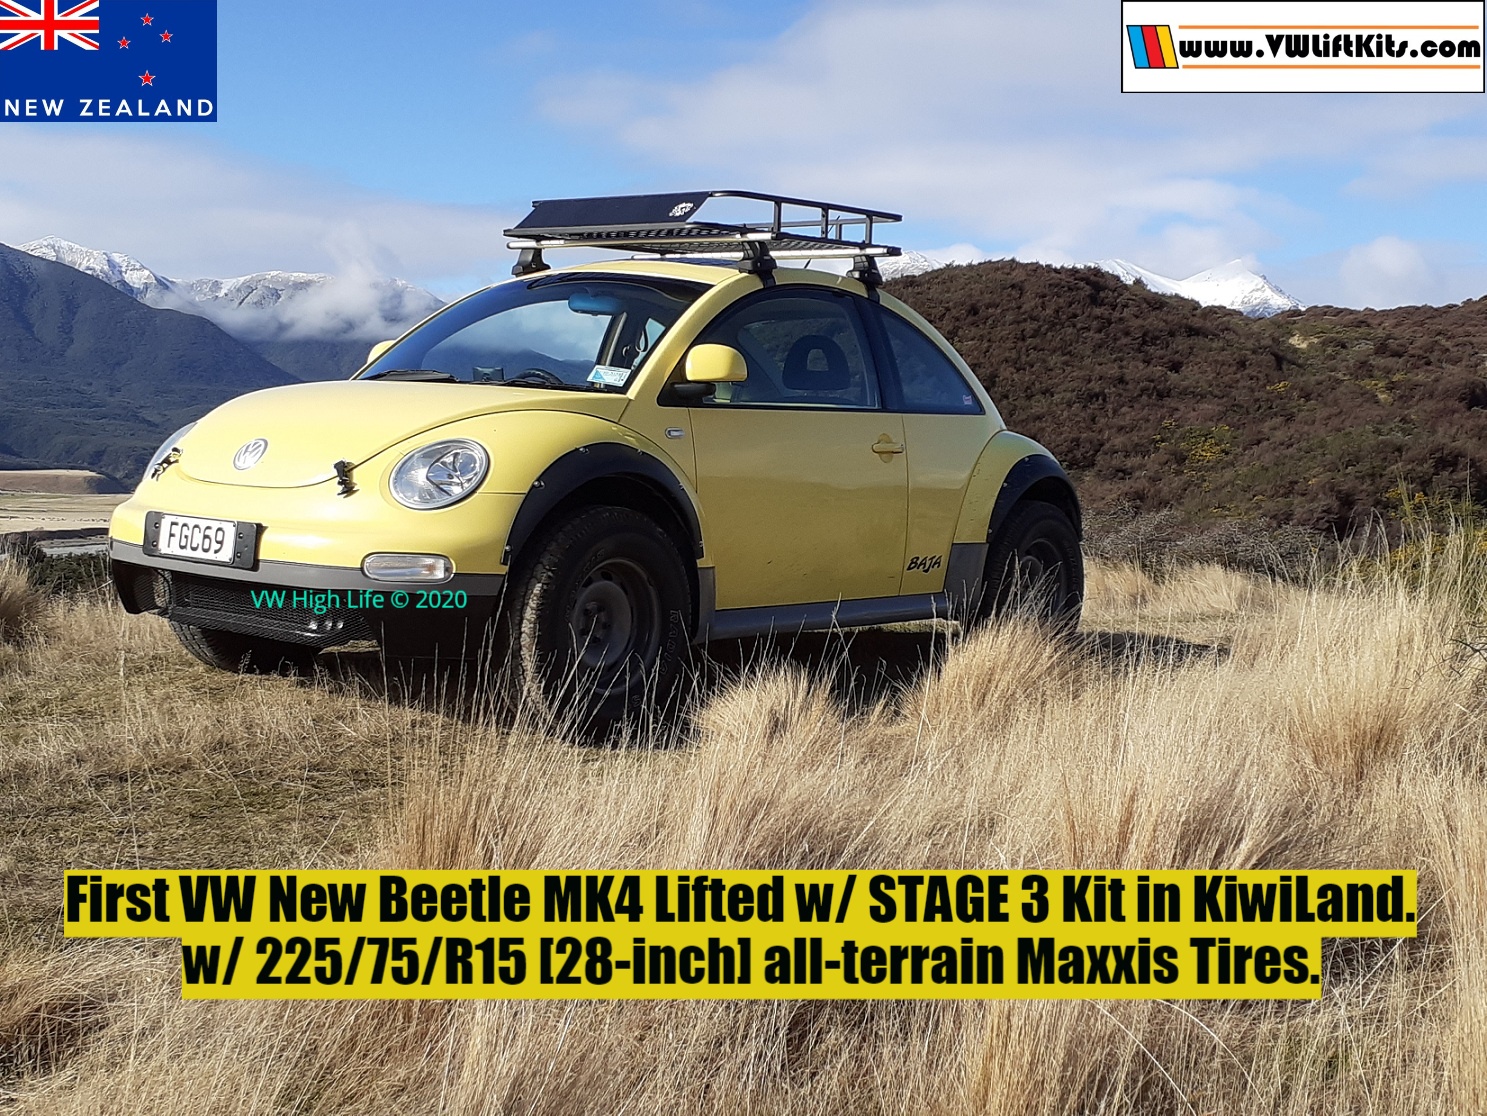 VW Beetle MK4 lifted w/ Stage 3 Kit and 28-inch Maxxis Tires! Congrats Richard and his COVID Beetle!. 